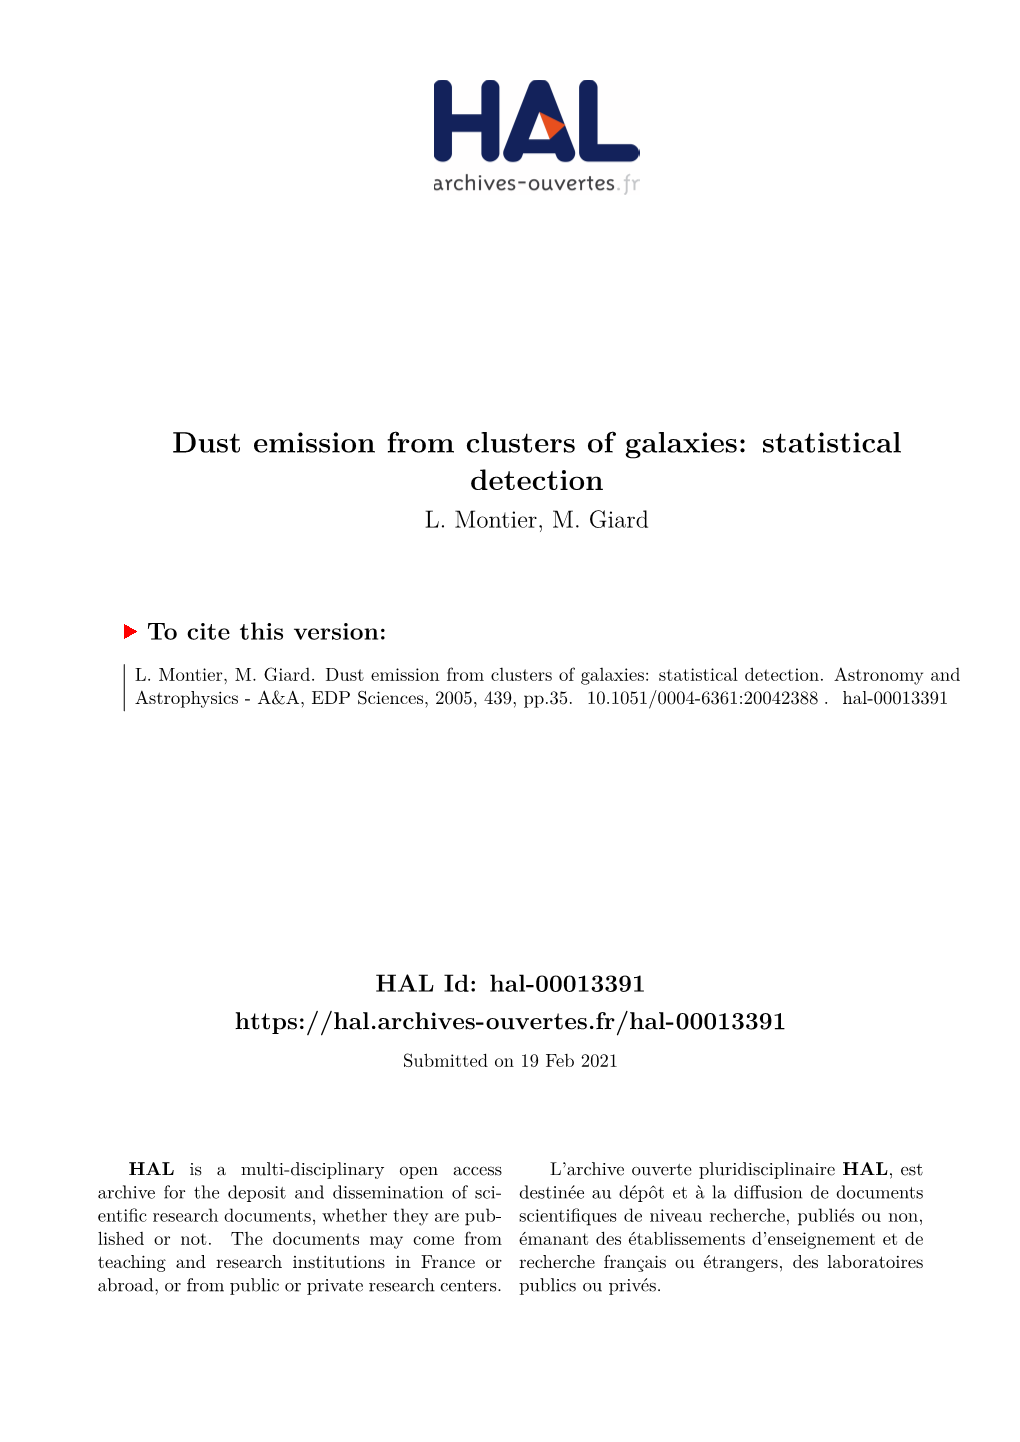 Dust Emission from Clusters of Galaxies: Statistical Detection L